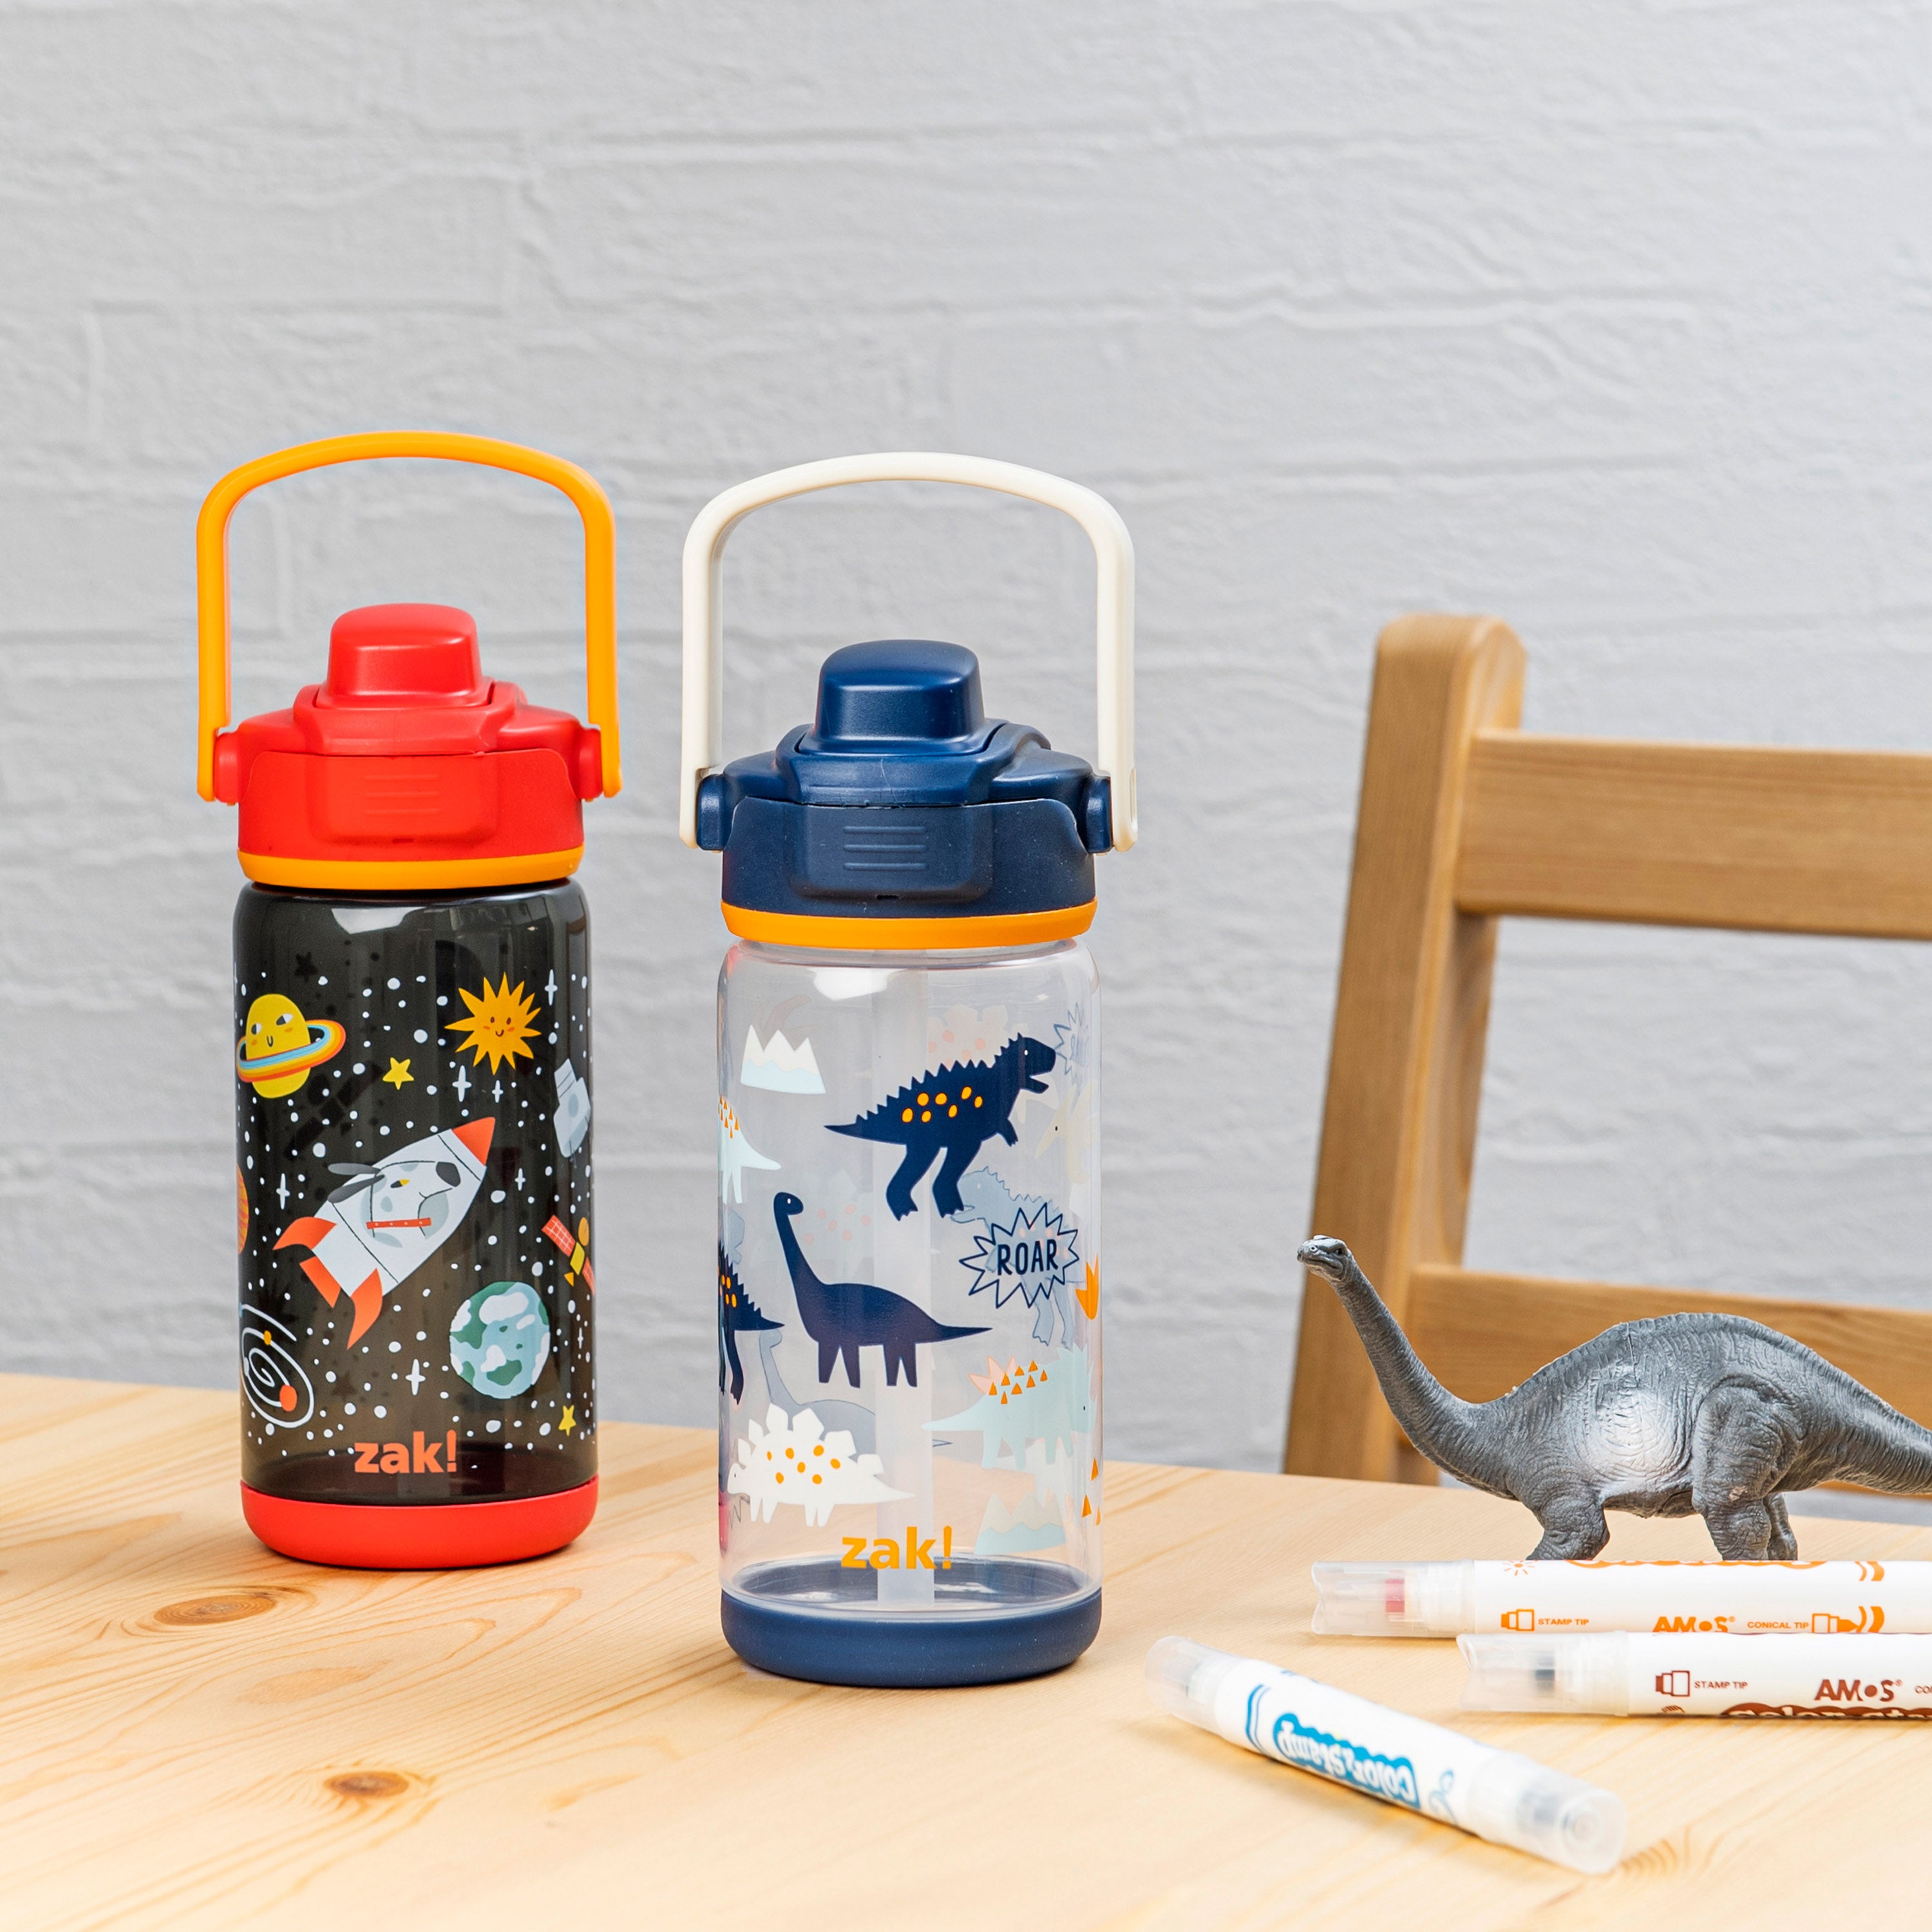 Beacon 2-Piece Kids Water Bottle Set with Covered Spout - Spaceships and Zaksaurus, 16 Ounces